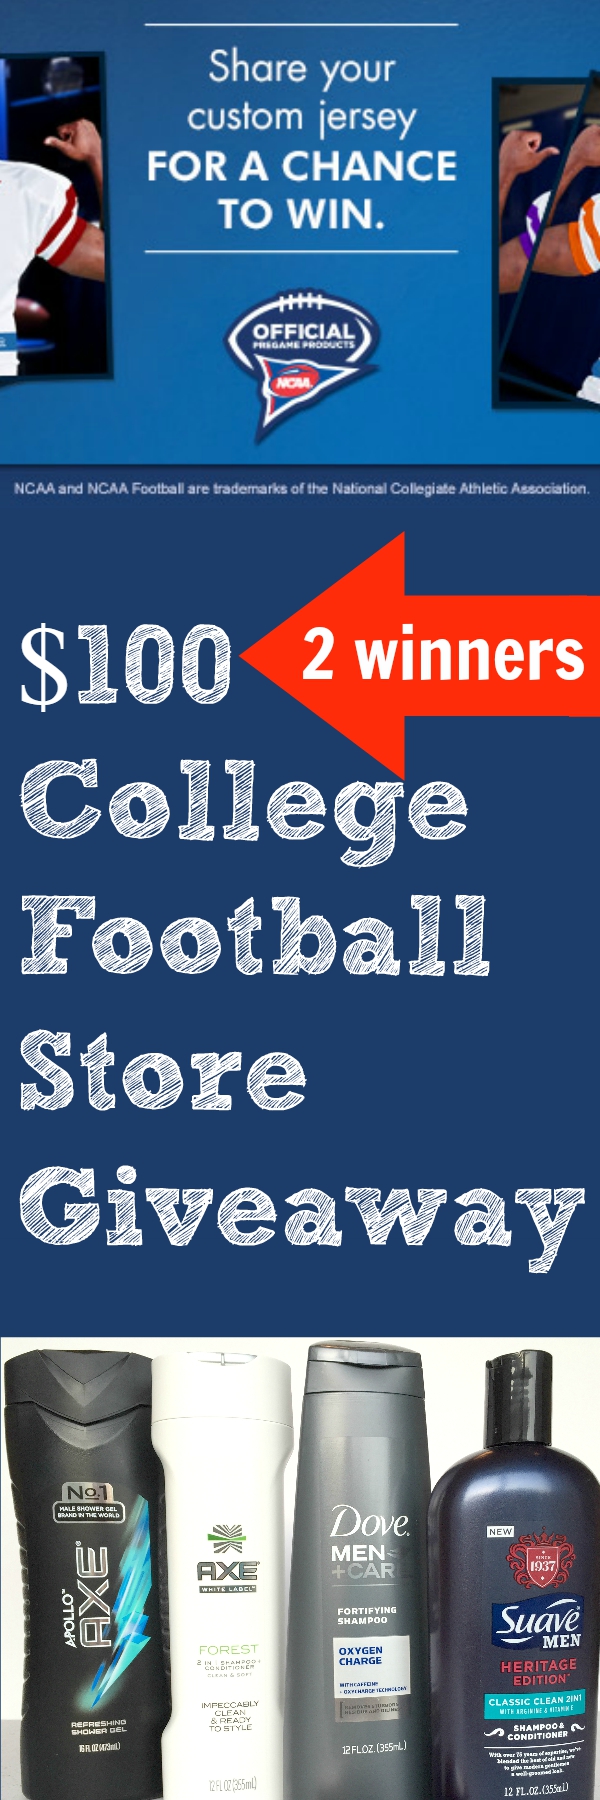 $100 College Football Store Giveaway (2 winners)